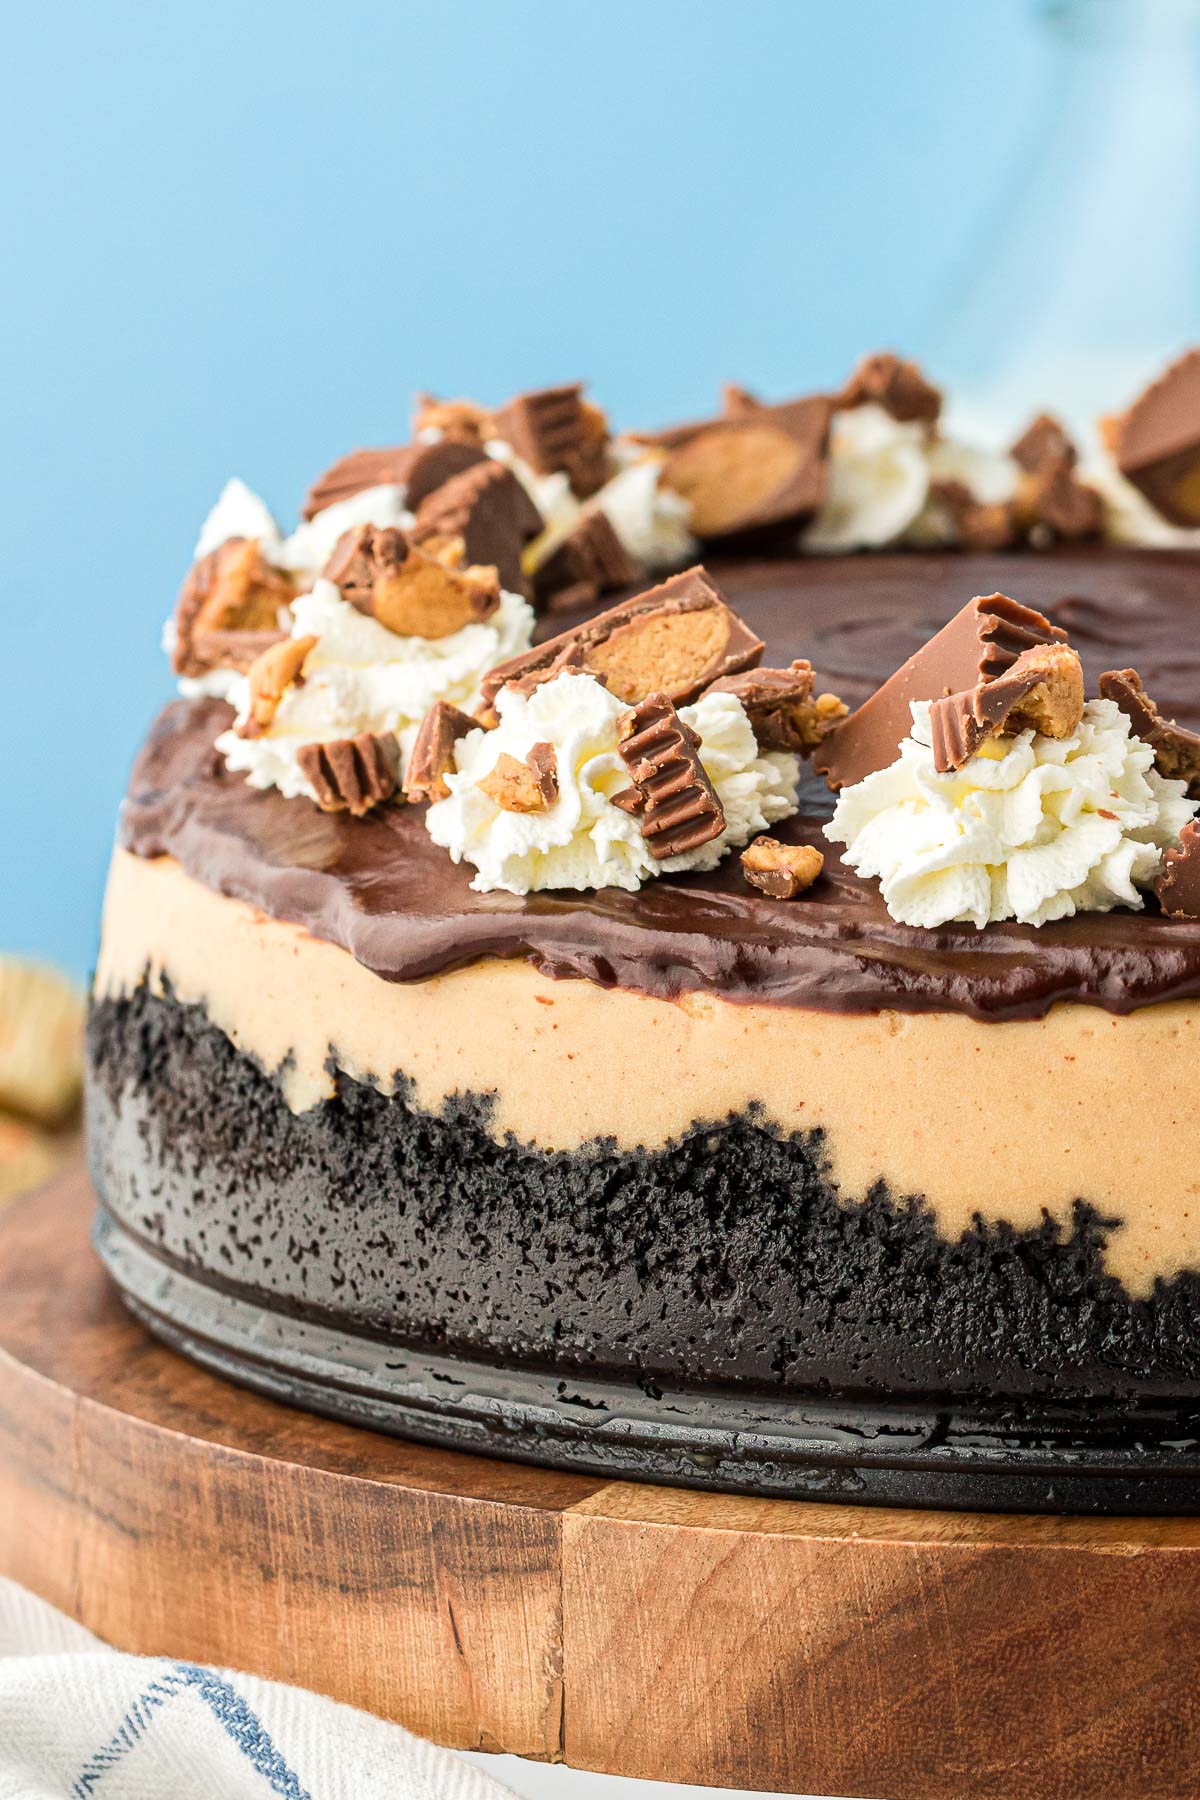 Peanut butter cheesecake on a wooden cake stand.